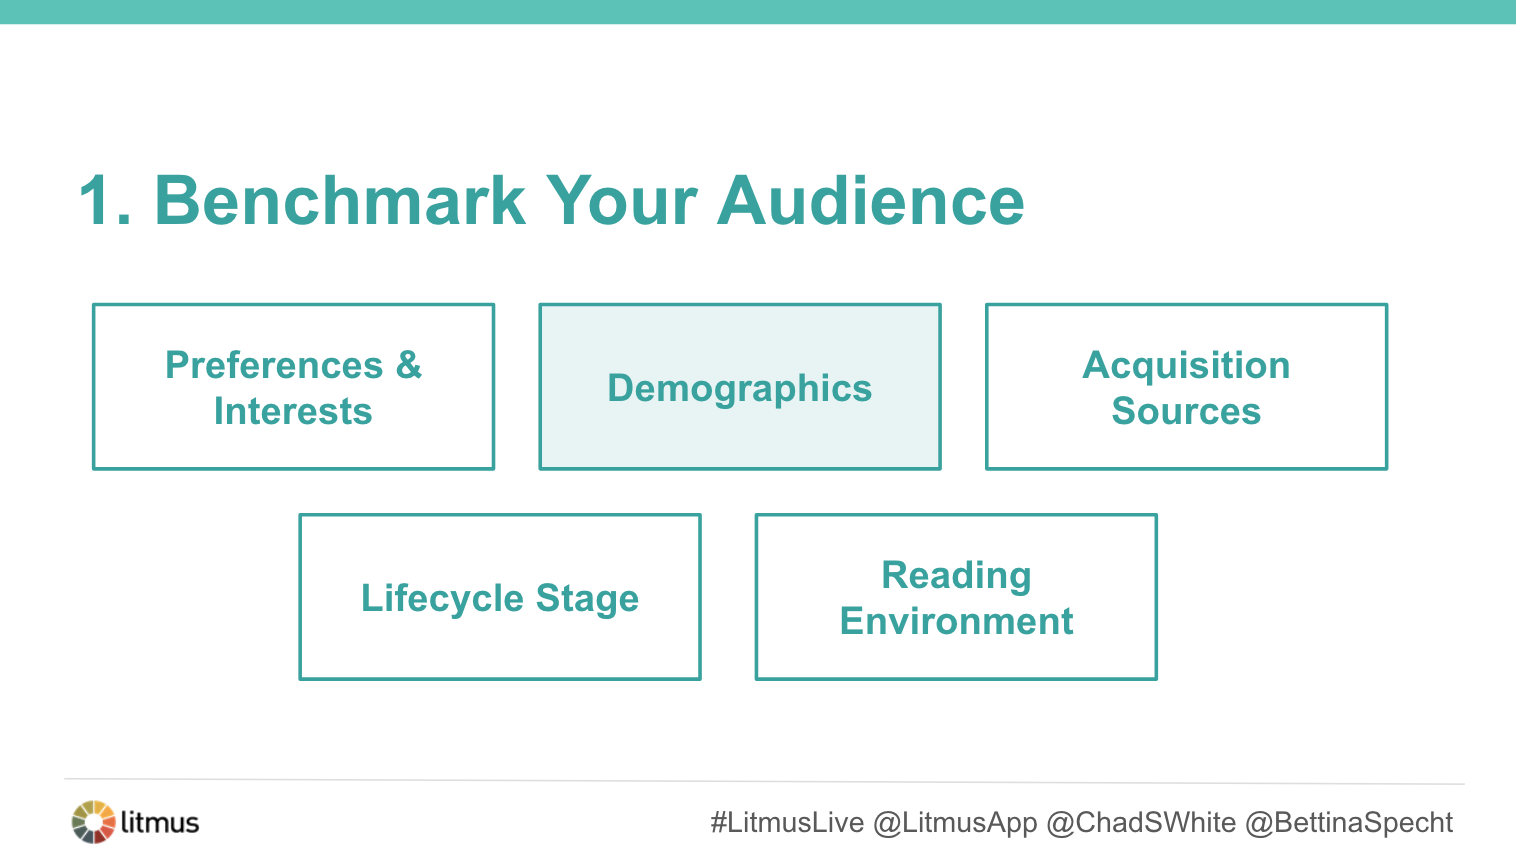 Elements of an Audience Assessment